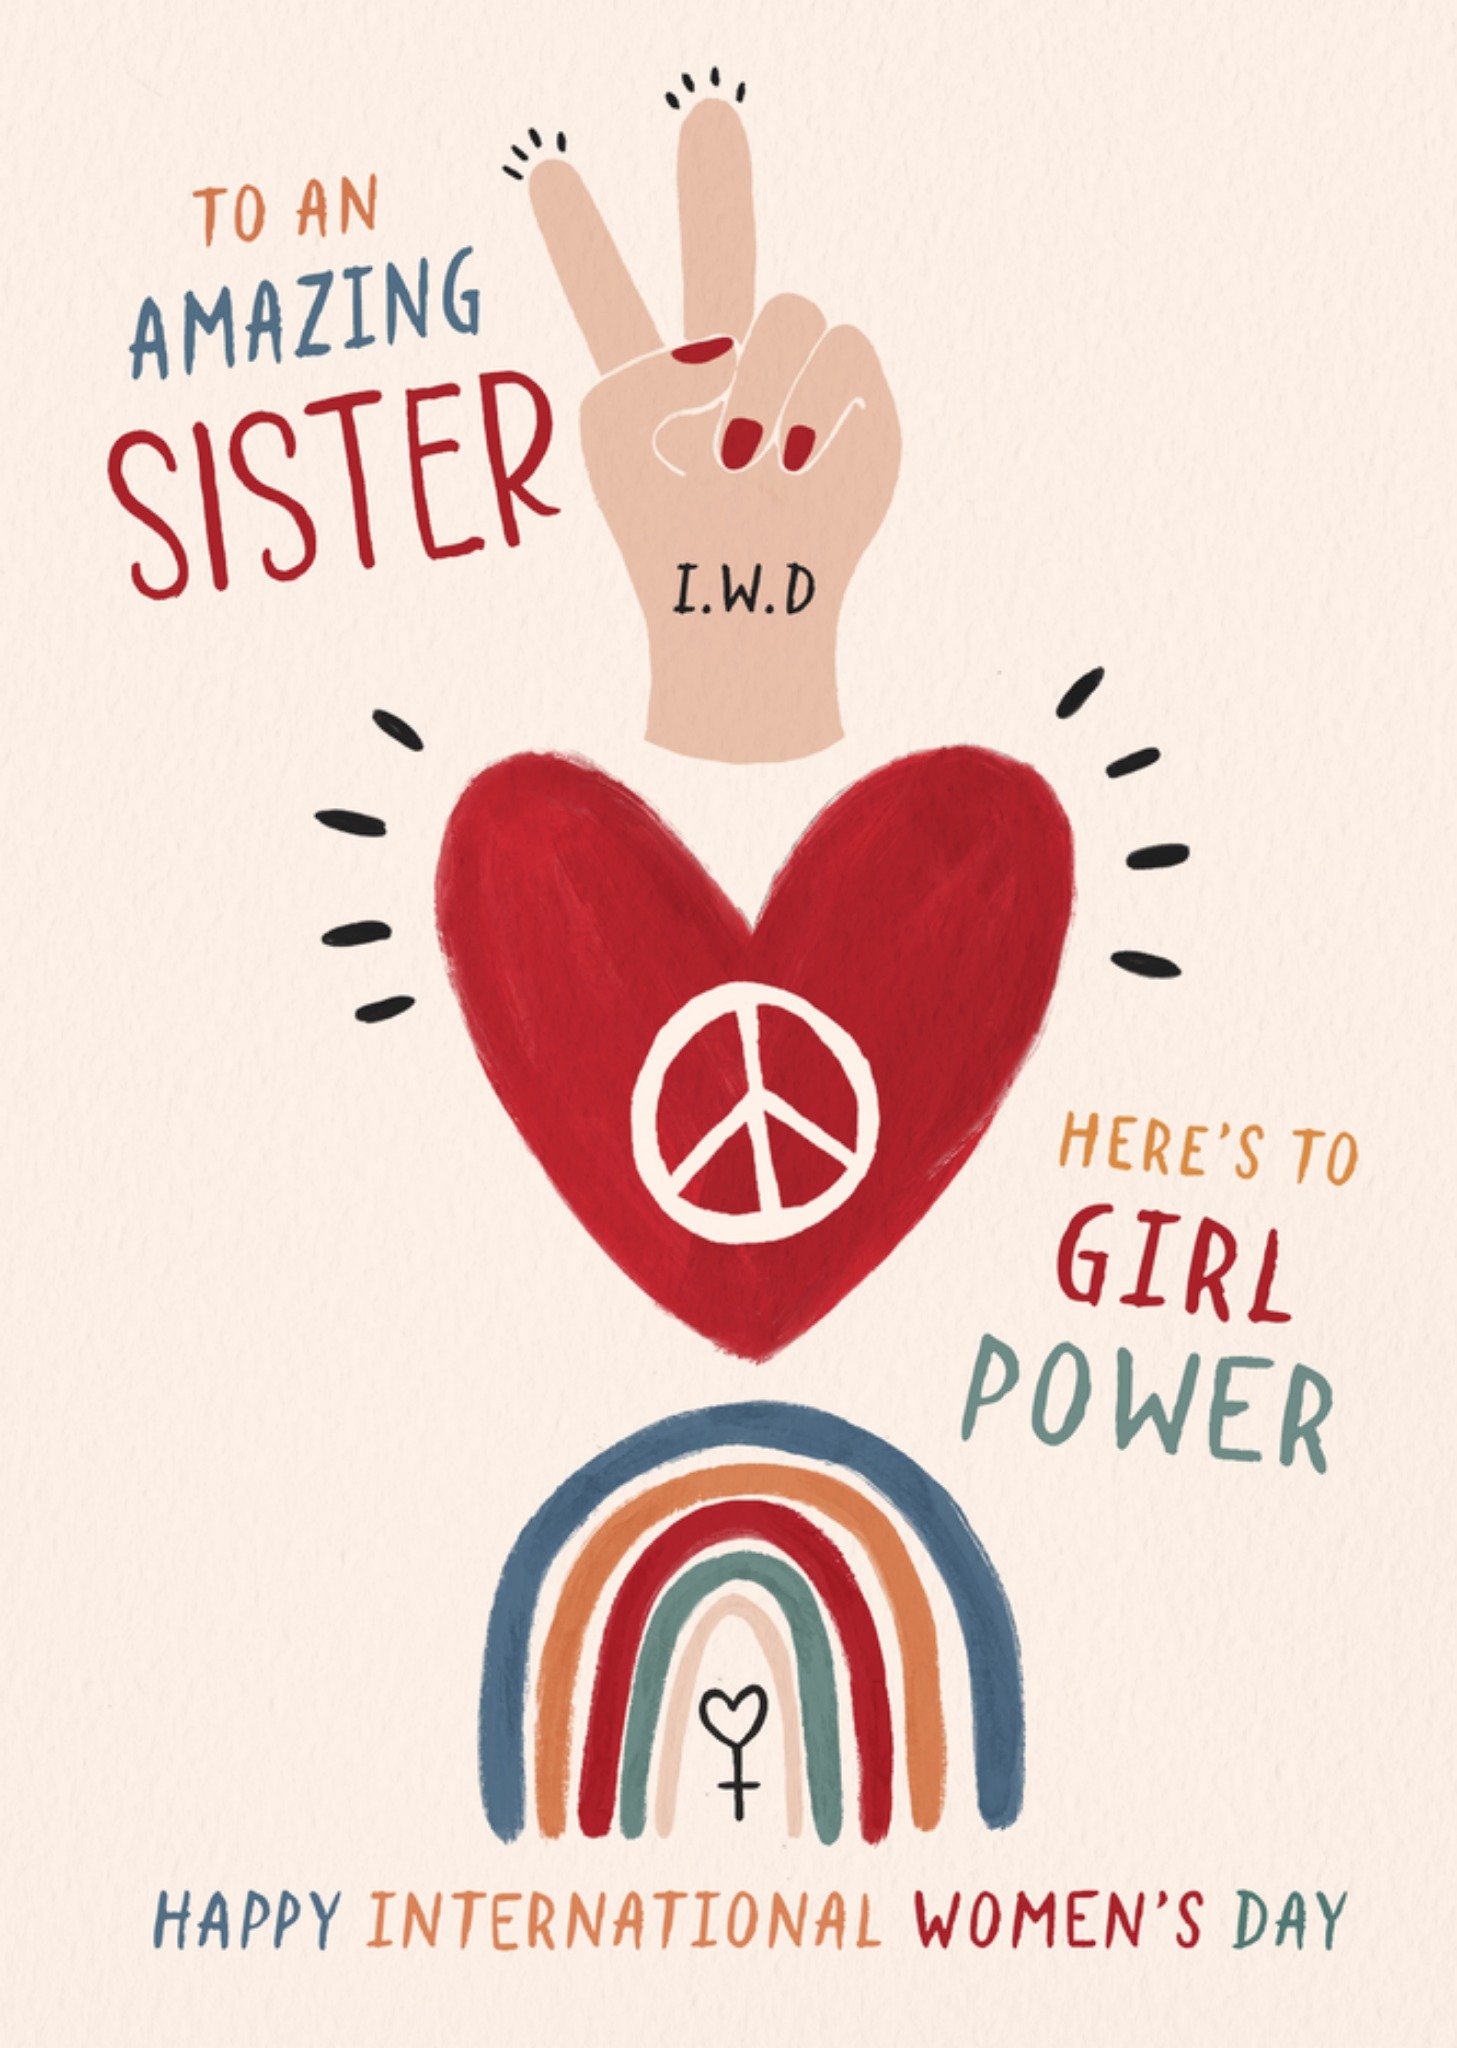 Moonpig Powerful Amazing Sister Hand Painted Girl Power Peace Signs International Womens Day Card, L